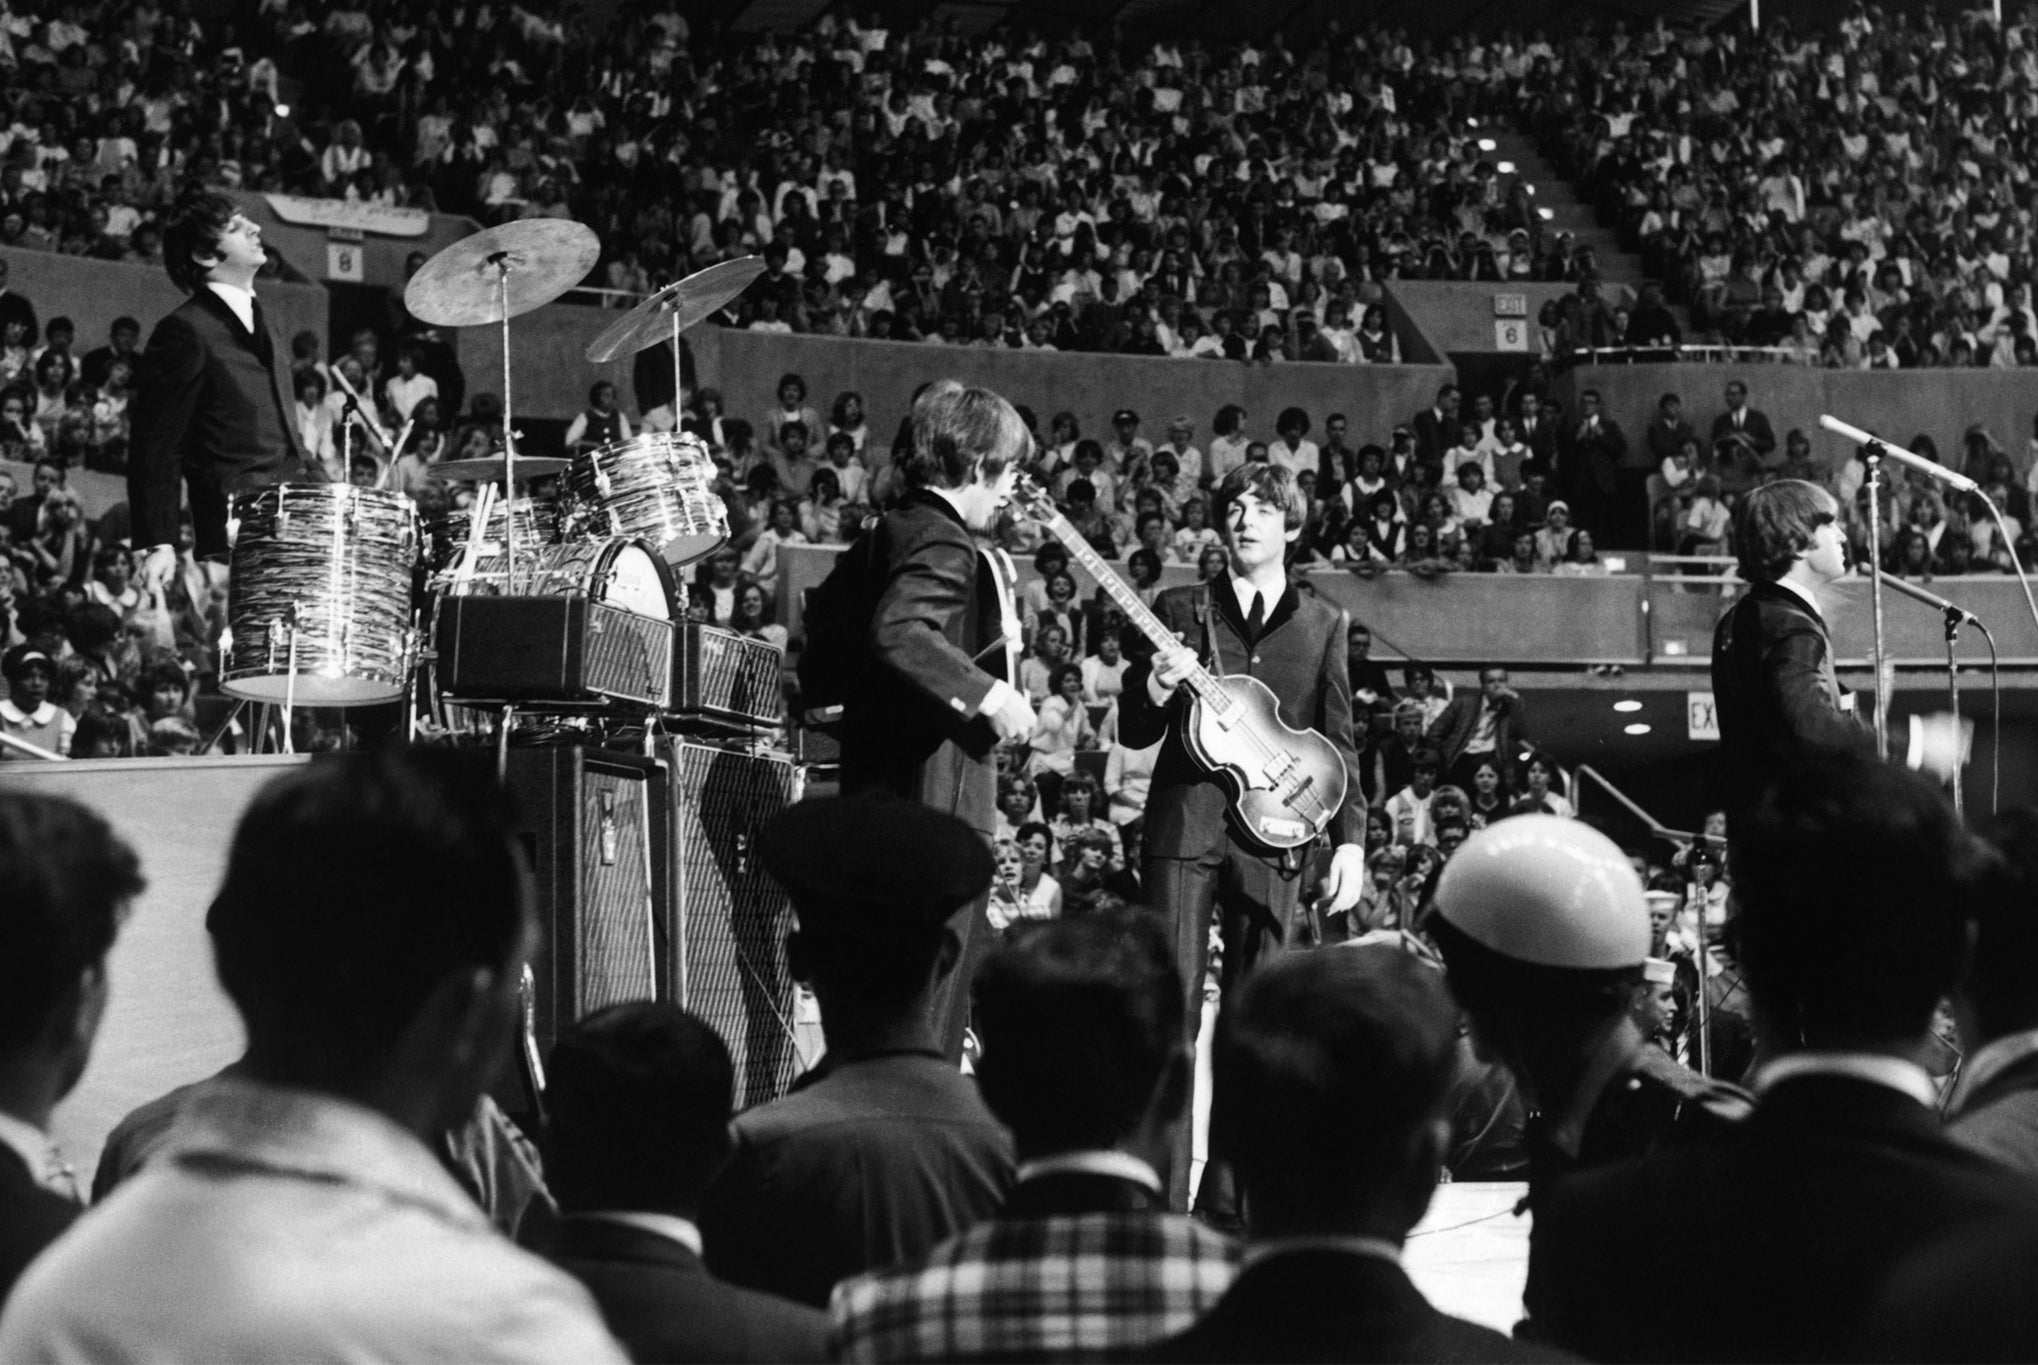 The Beatles perform at the Seattle Center Coliseum in Washington during their Summer 1964 United States and Canada Tour, 21 August 1964